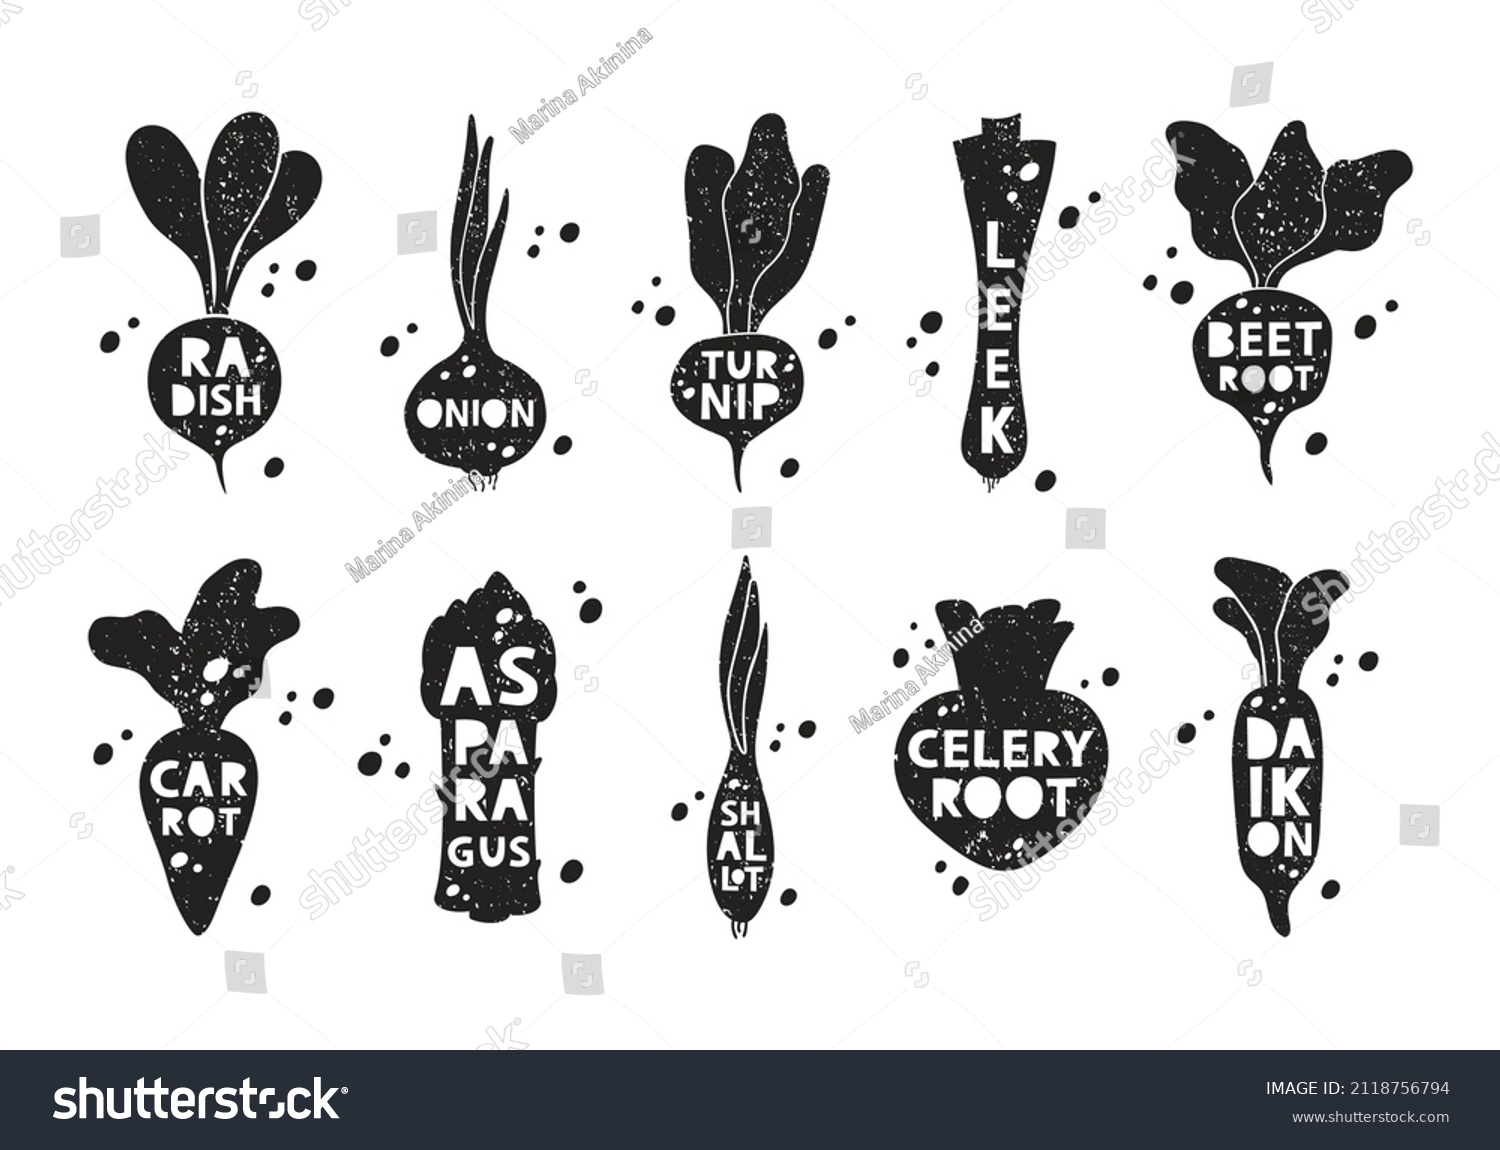 Vegetable and root crops, grunge stickers set. Radish, onion, turnip, beet, leek, carrot, daikon, asparagus, shallot, celery. Black texture silhouette, lettering inside. Imitation of stamp with scuffs #2118756794